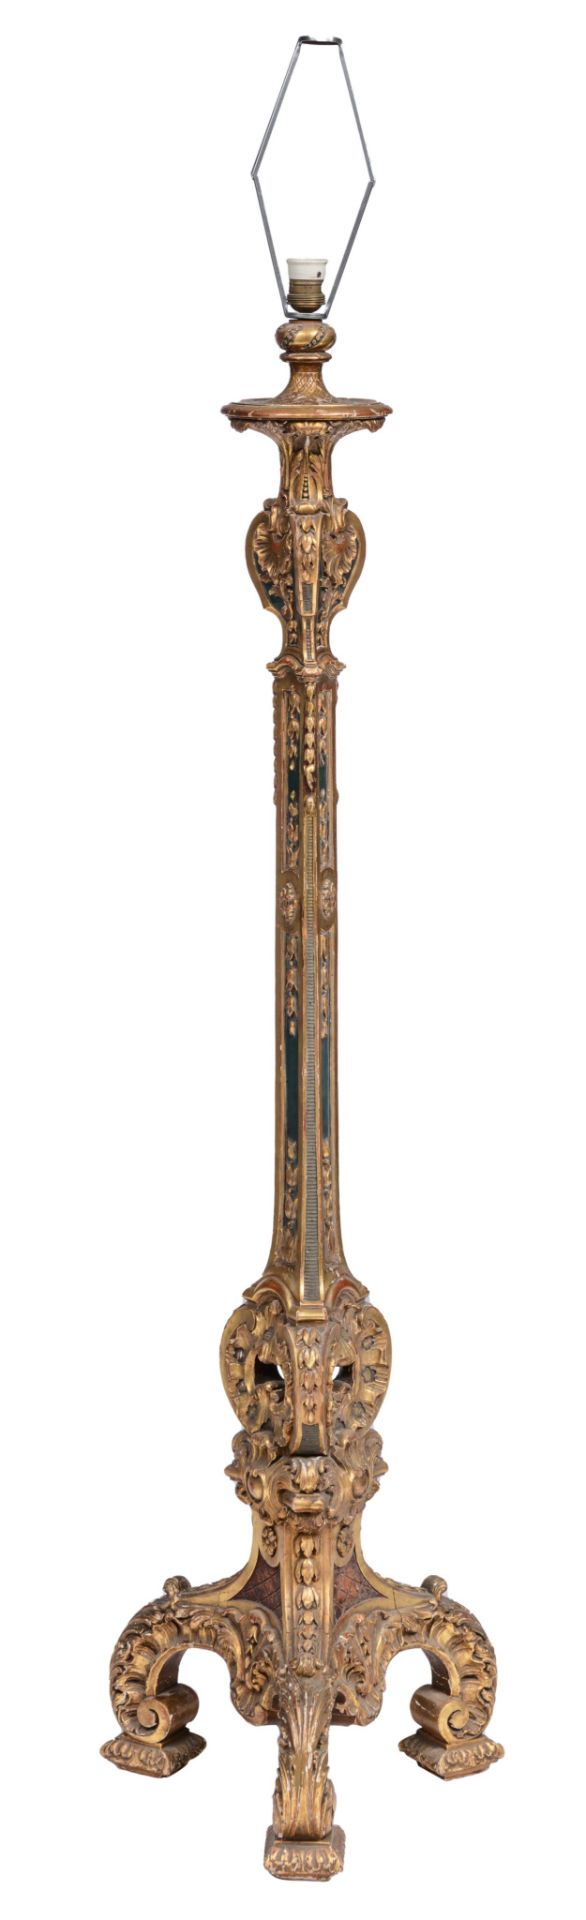 (T) A finely carved, polychrome and gilt decorated Rococo style torchère, H 147 cm